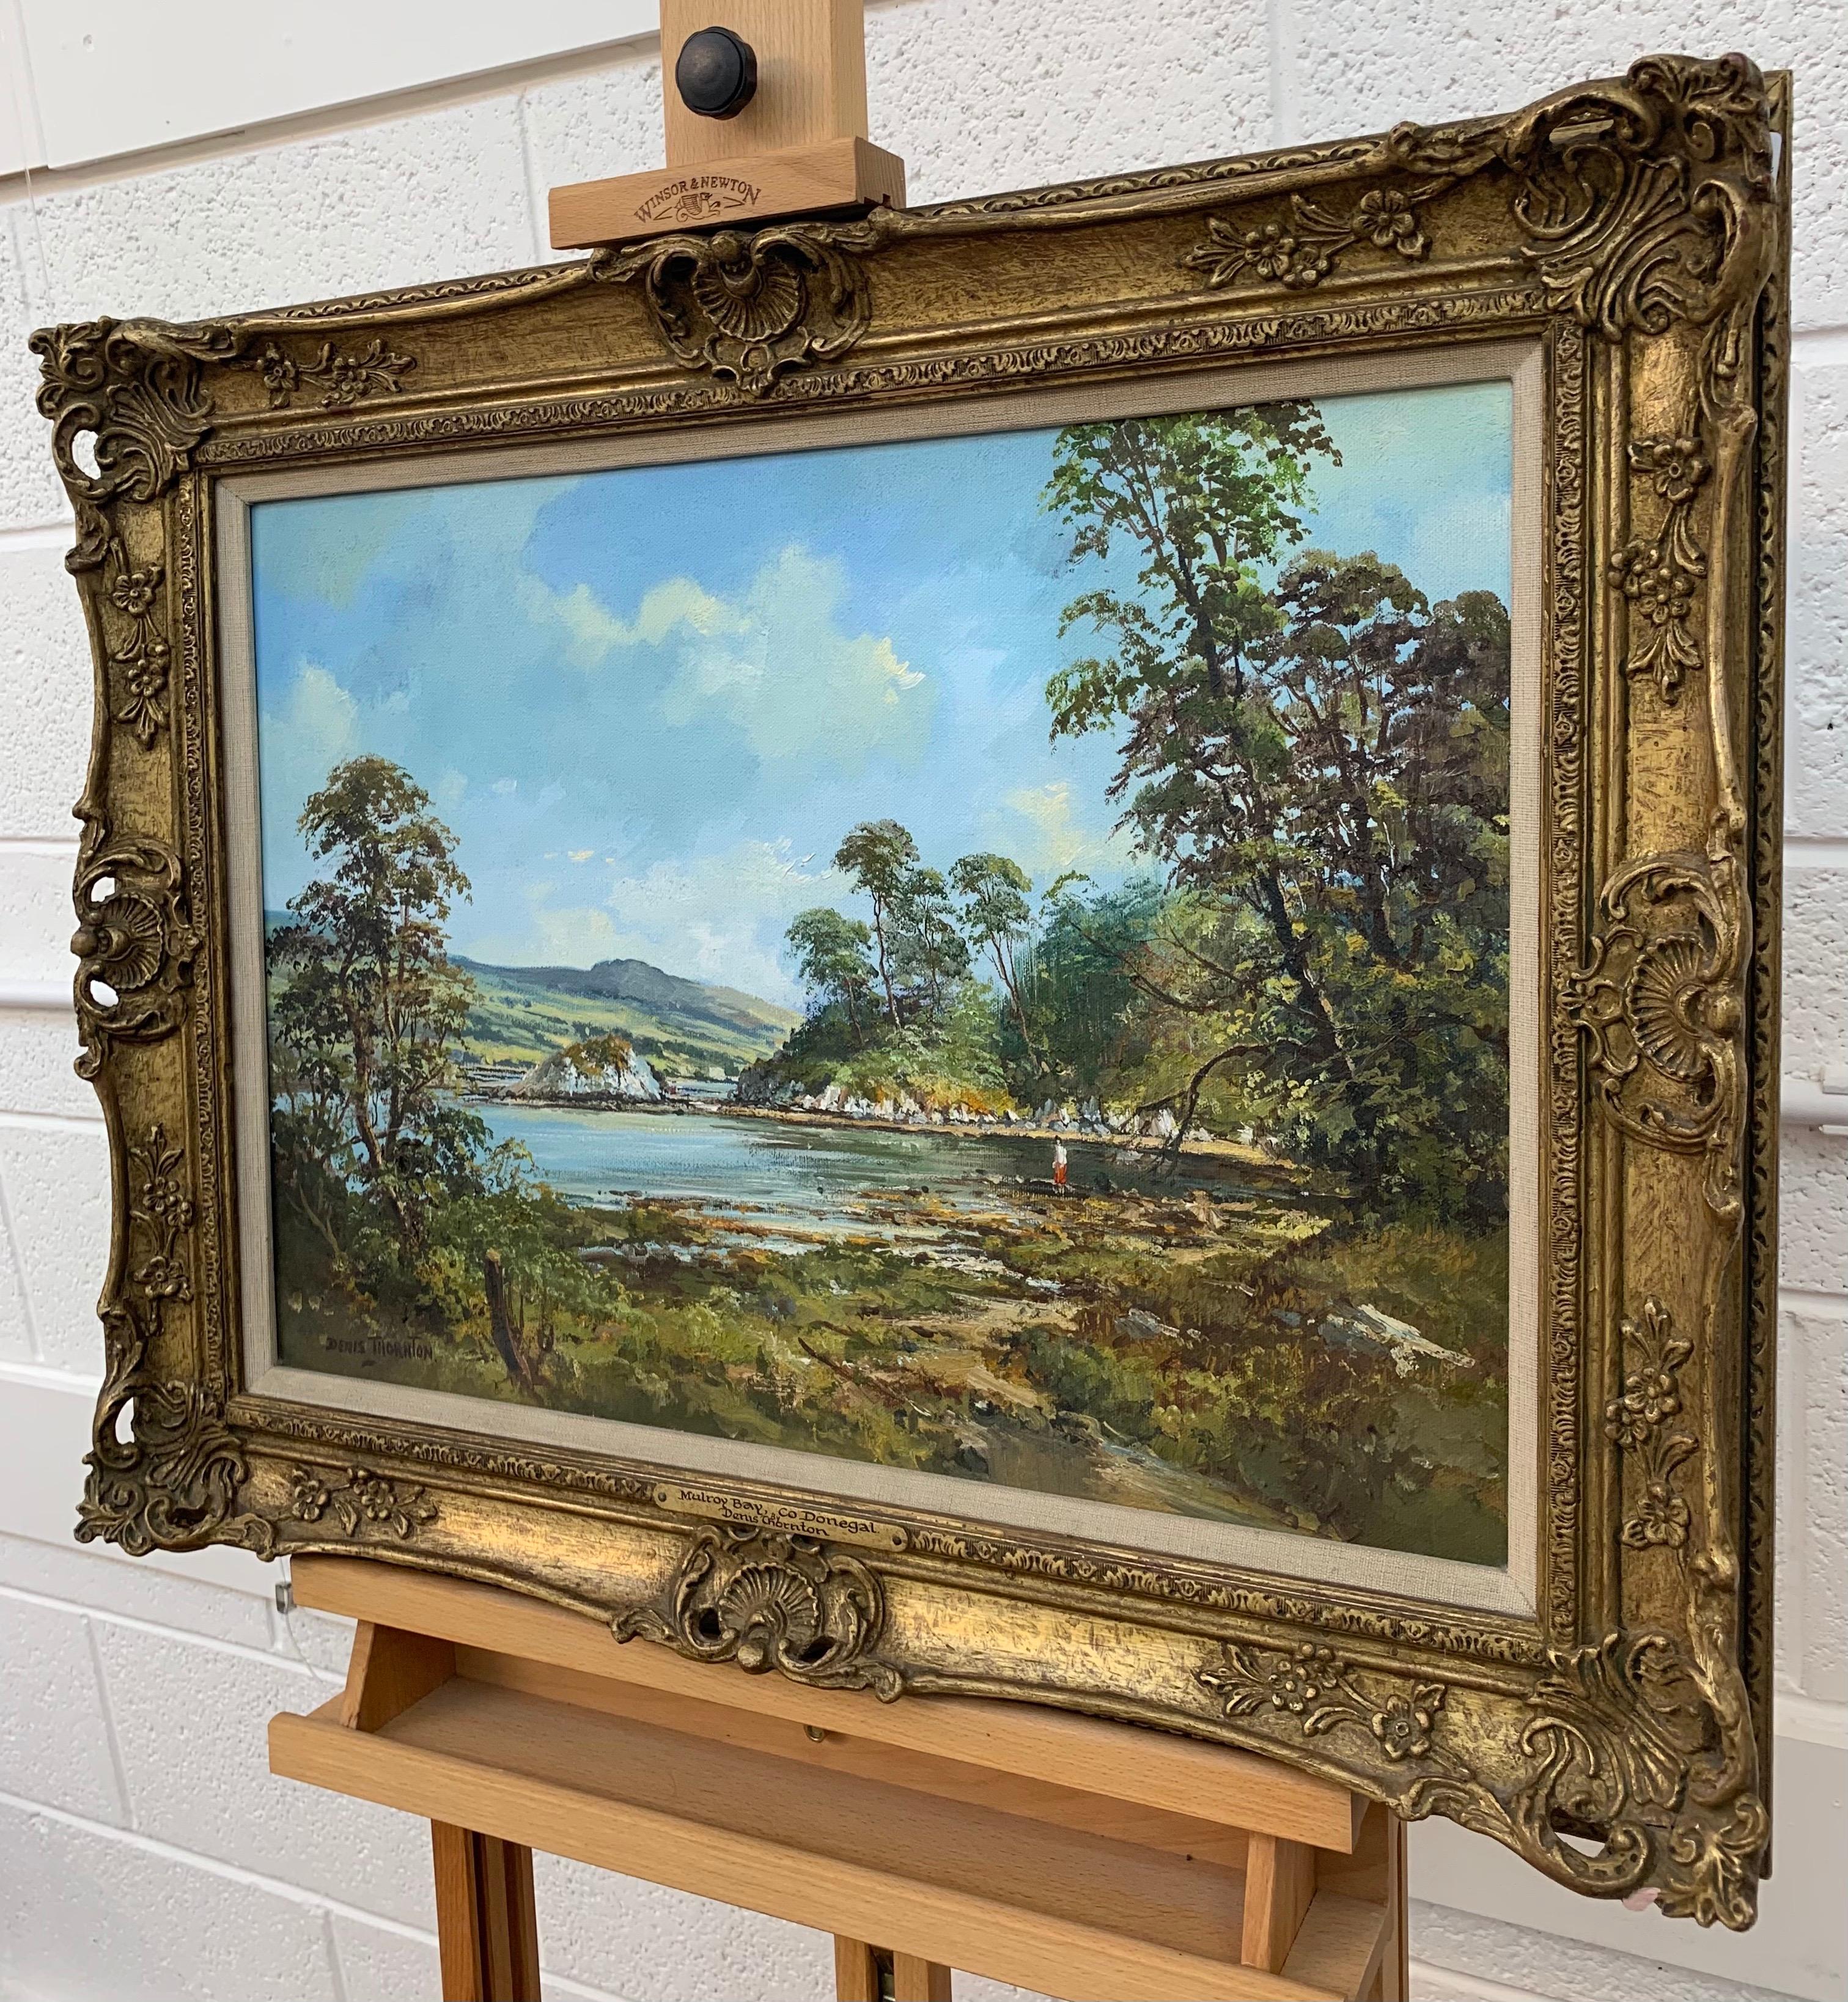 Original Post-War Oil Painting of Mulroy Bay Donegal Ireland by Irish Artist - Brown Figurative Painting by Denis Thornton